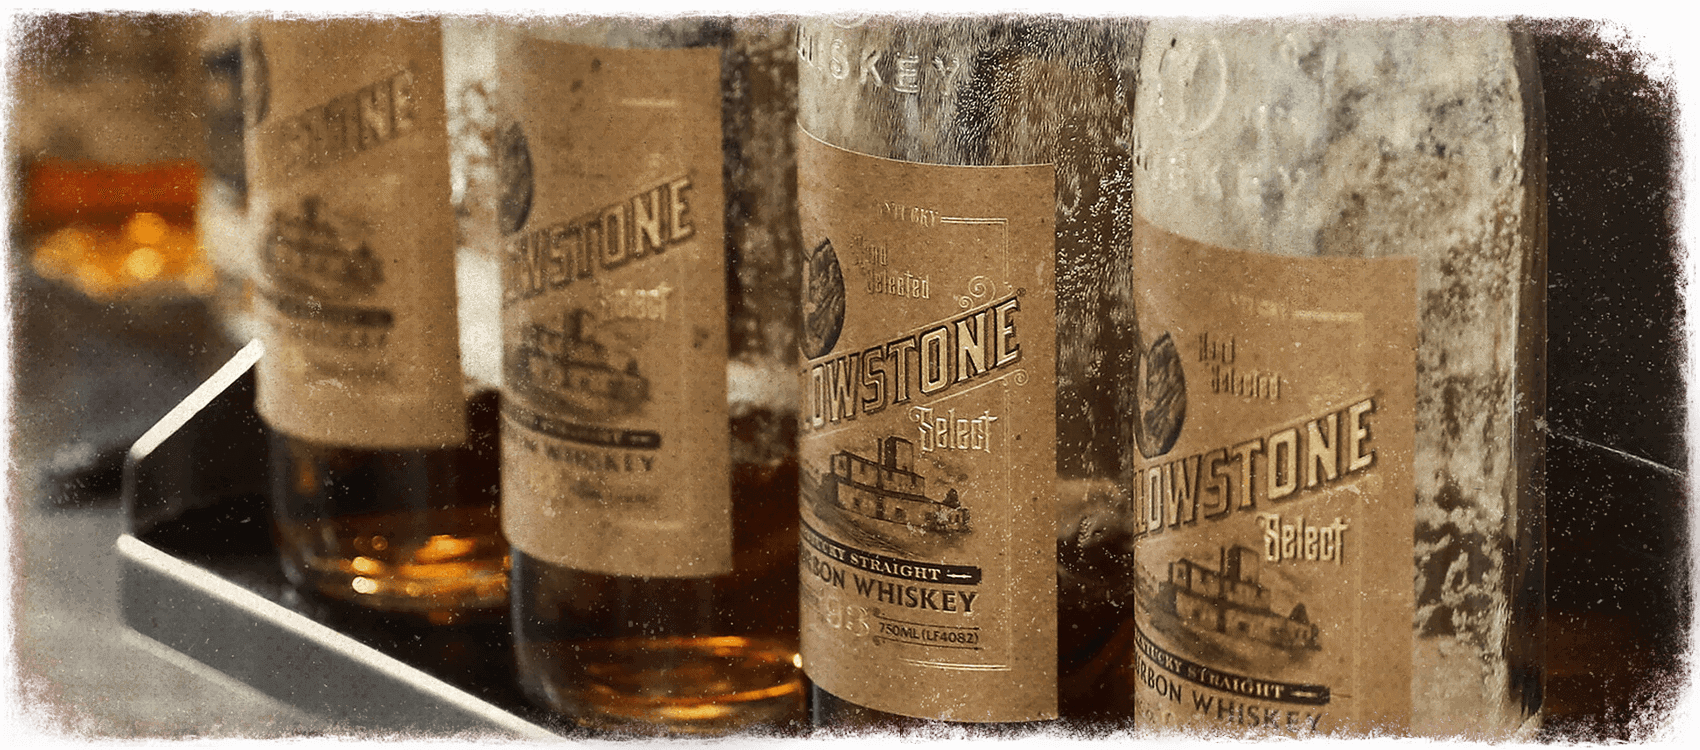 Yellowstone Select Header New - Yellowstone® Kentucky Straight Bourbon Whiskey Launches Program Supporting America’s National Parks